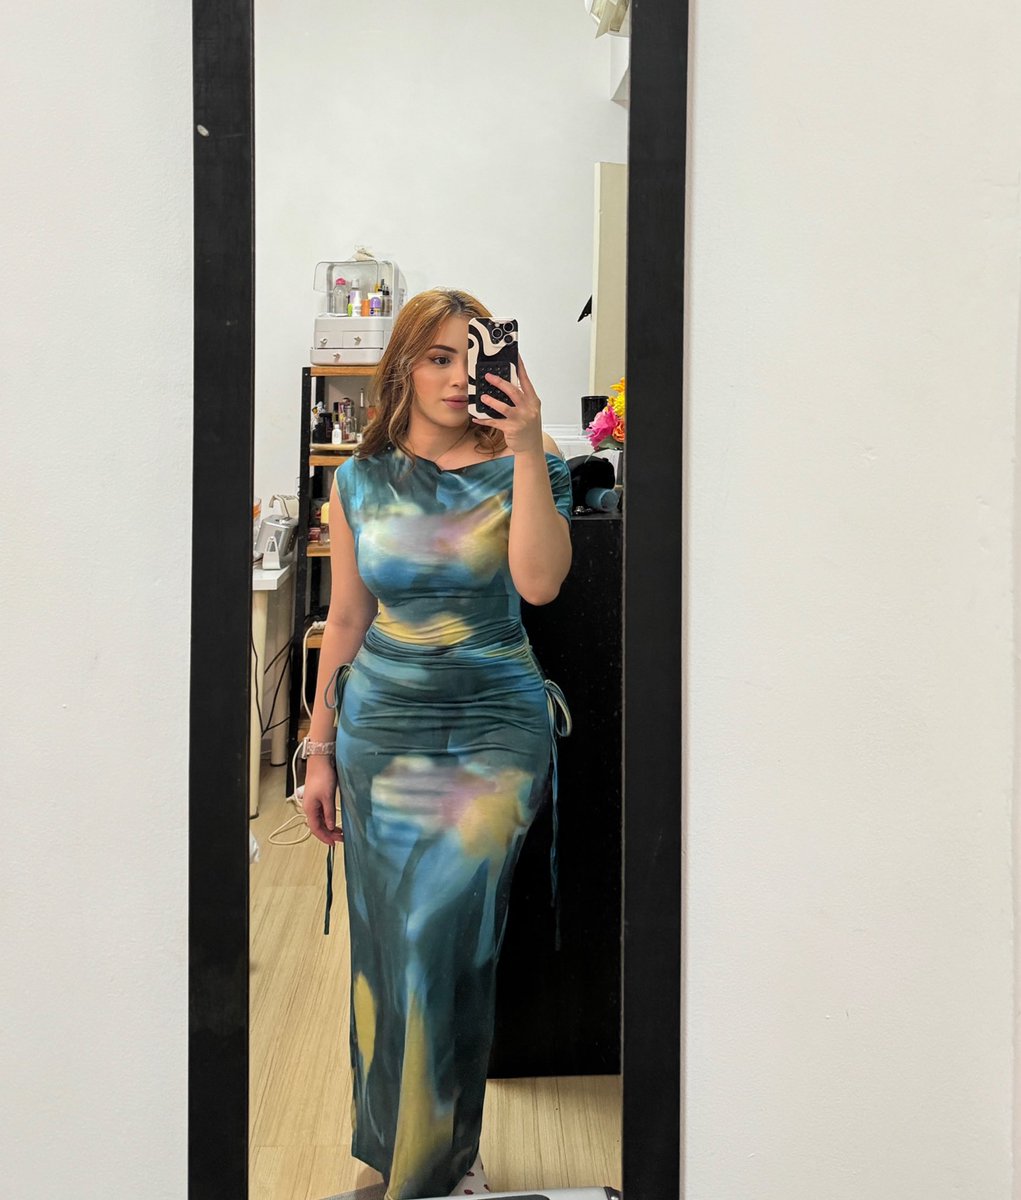 bought this dress because it reminds me of the ocean